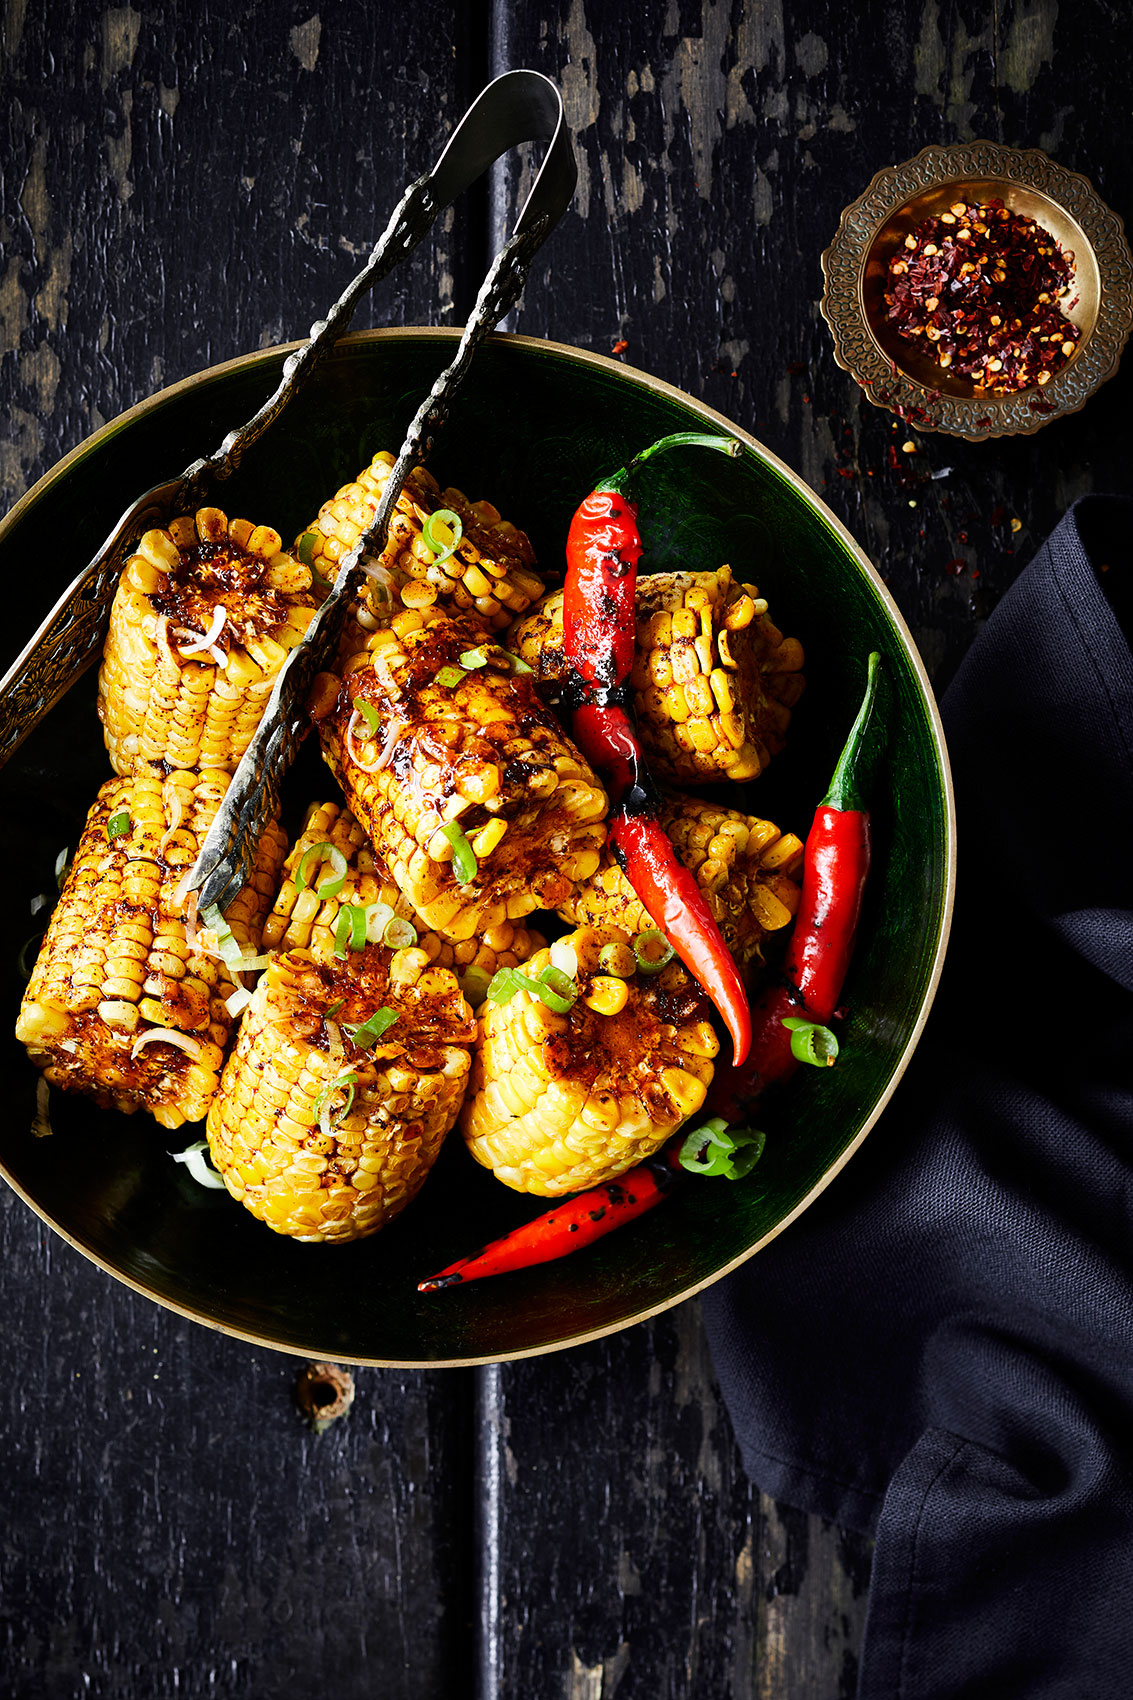 My Indian Kitchen • Spicy Grilled Corn Cob with Raw Chilli & Spring Onion • Cookbook & Editorial Food Photography